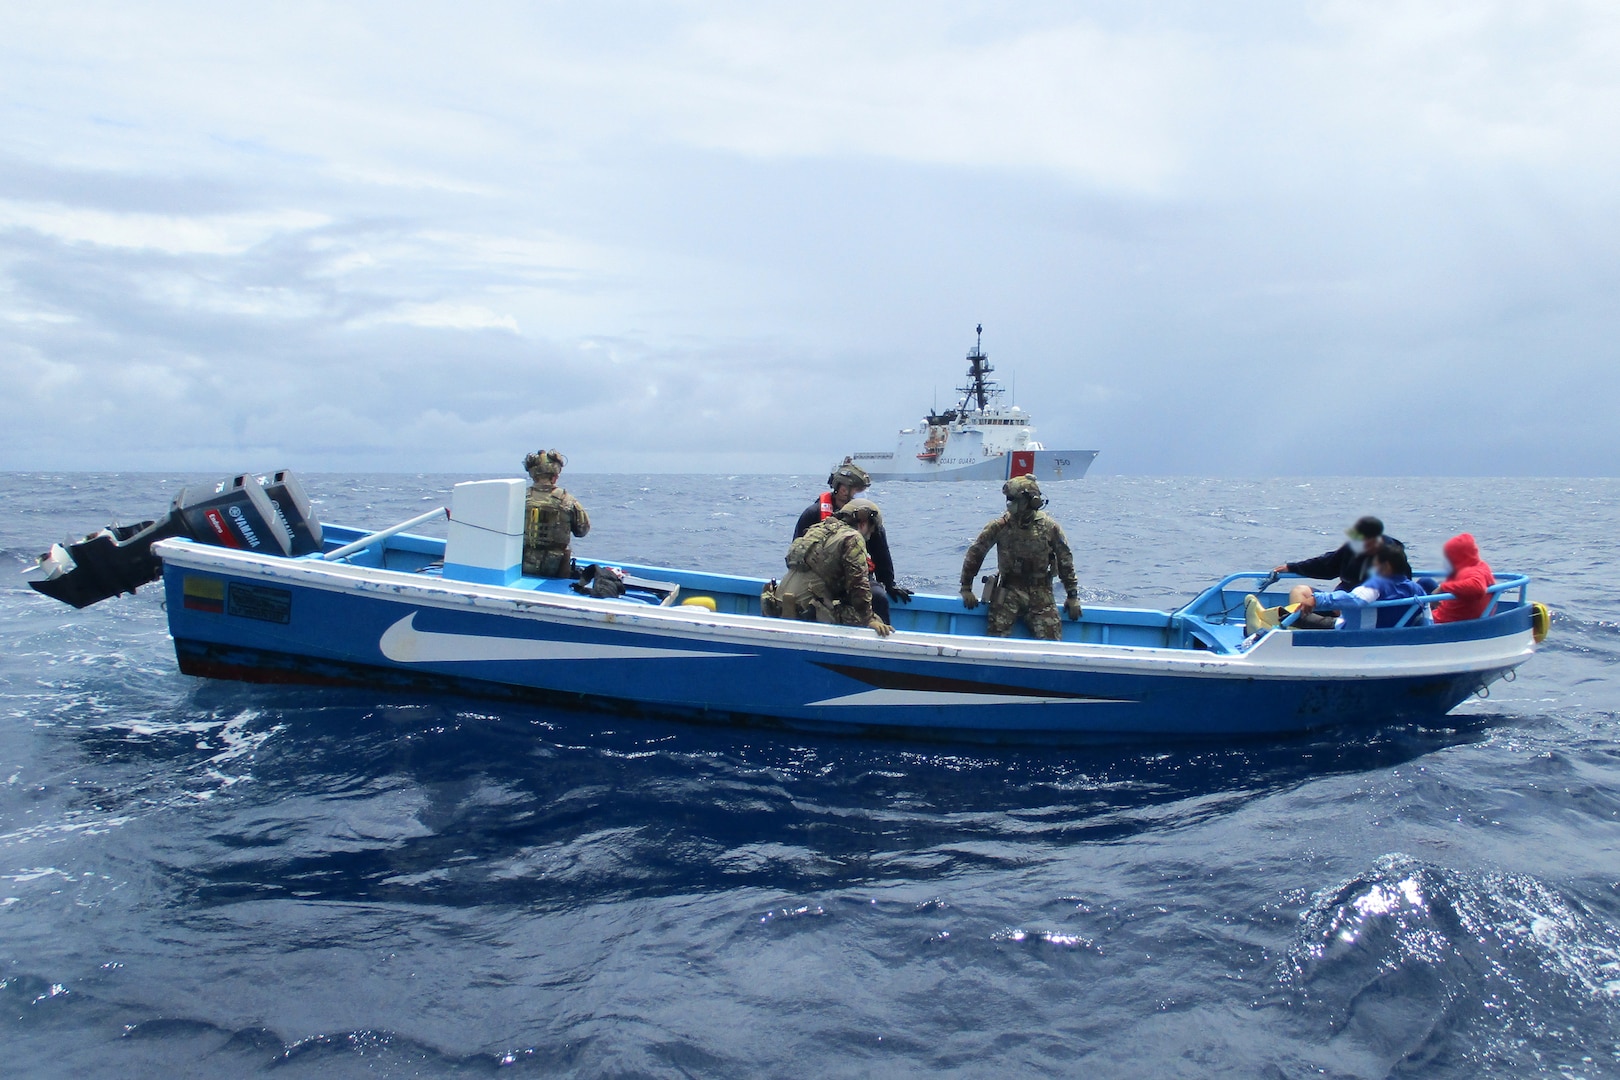 The Coast Guard Cutter Bertholf and a go-fast vessel interdicted in the Eastern Pacific Ocean off the Coast of Central America in late-July 2020.